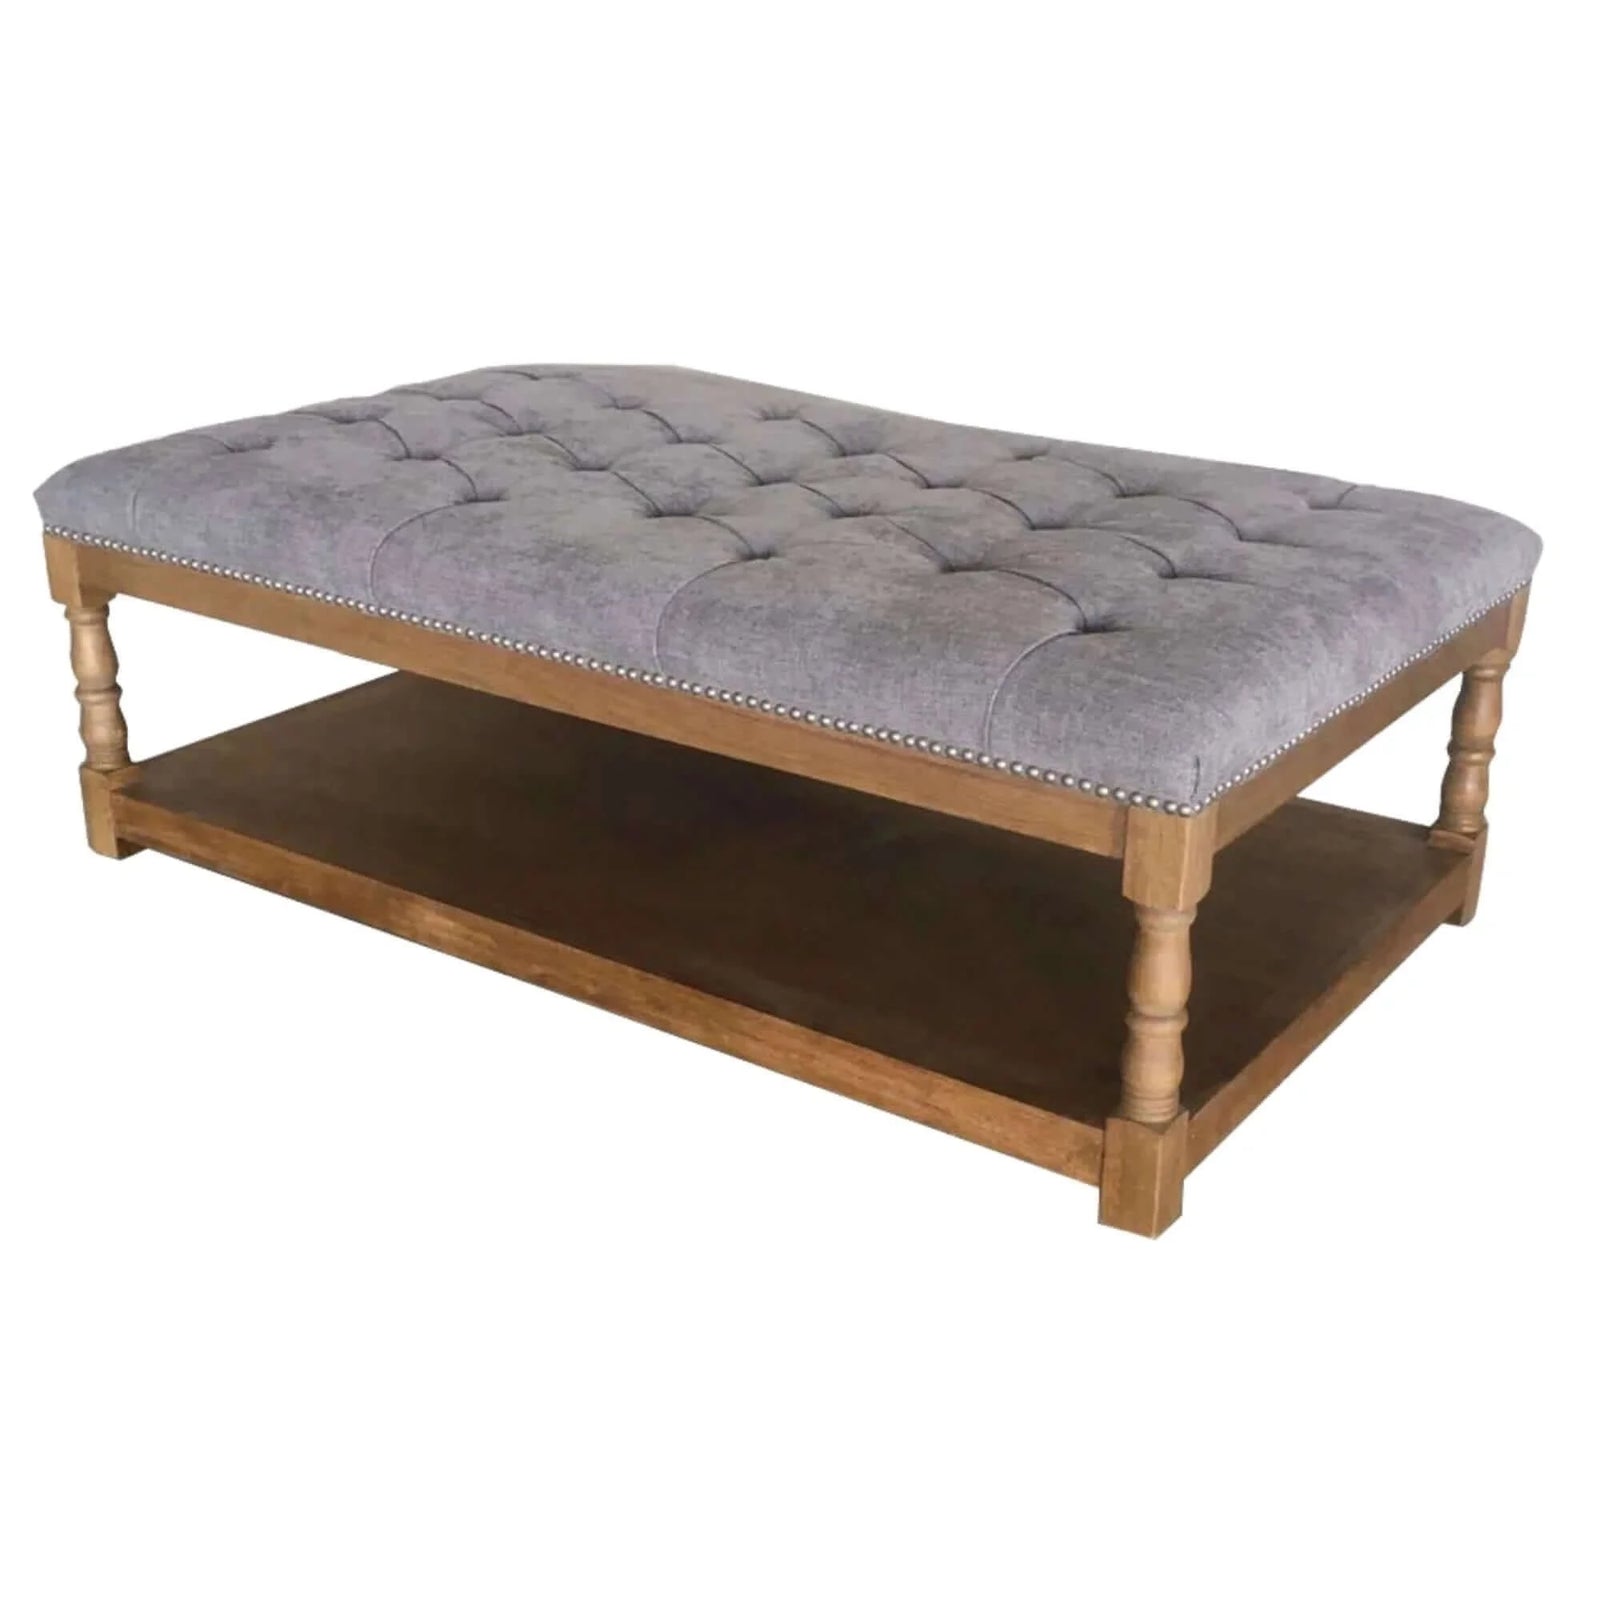 Rosebud Ottoman Bed End Chair Seat Tufted Fabric Seat Storage Foot Stools - Beige in Australia -Upinteriors